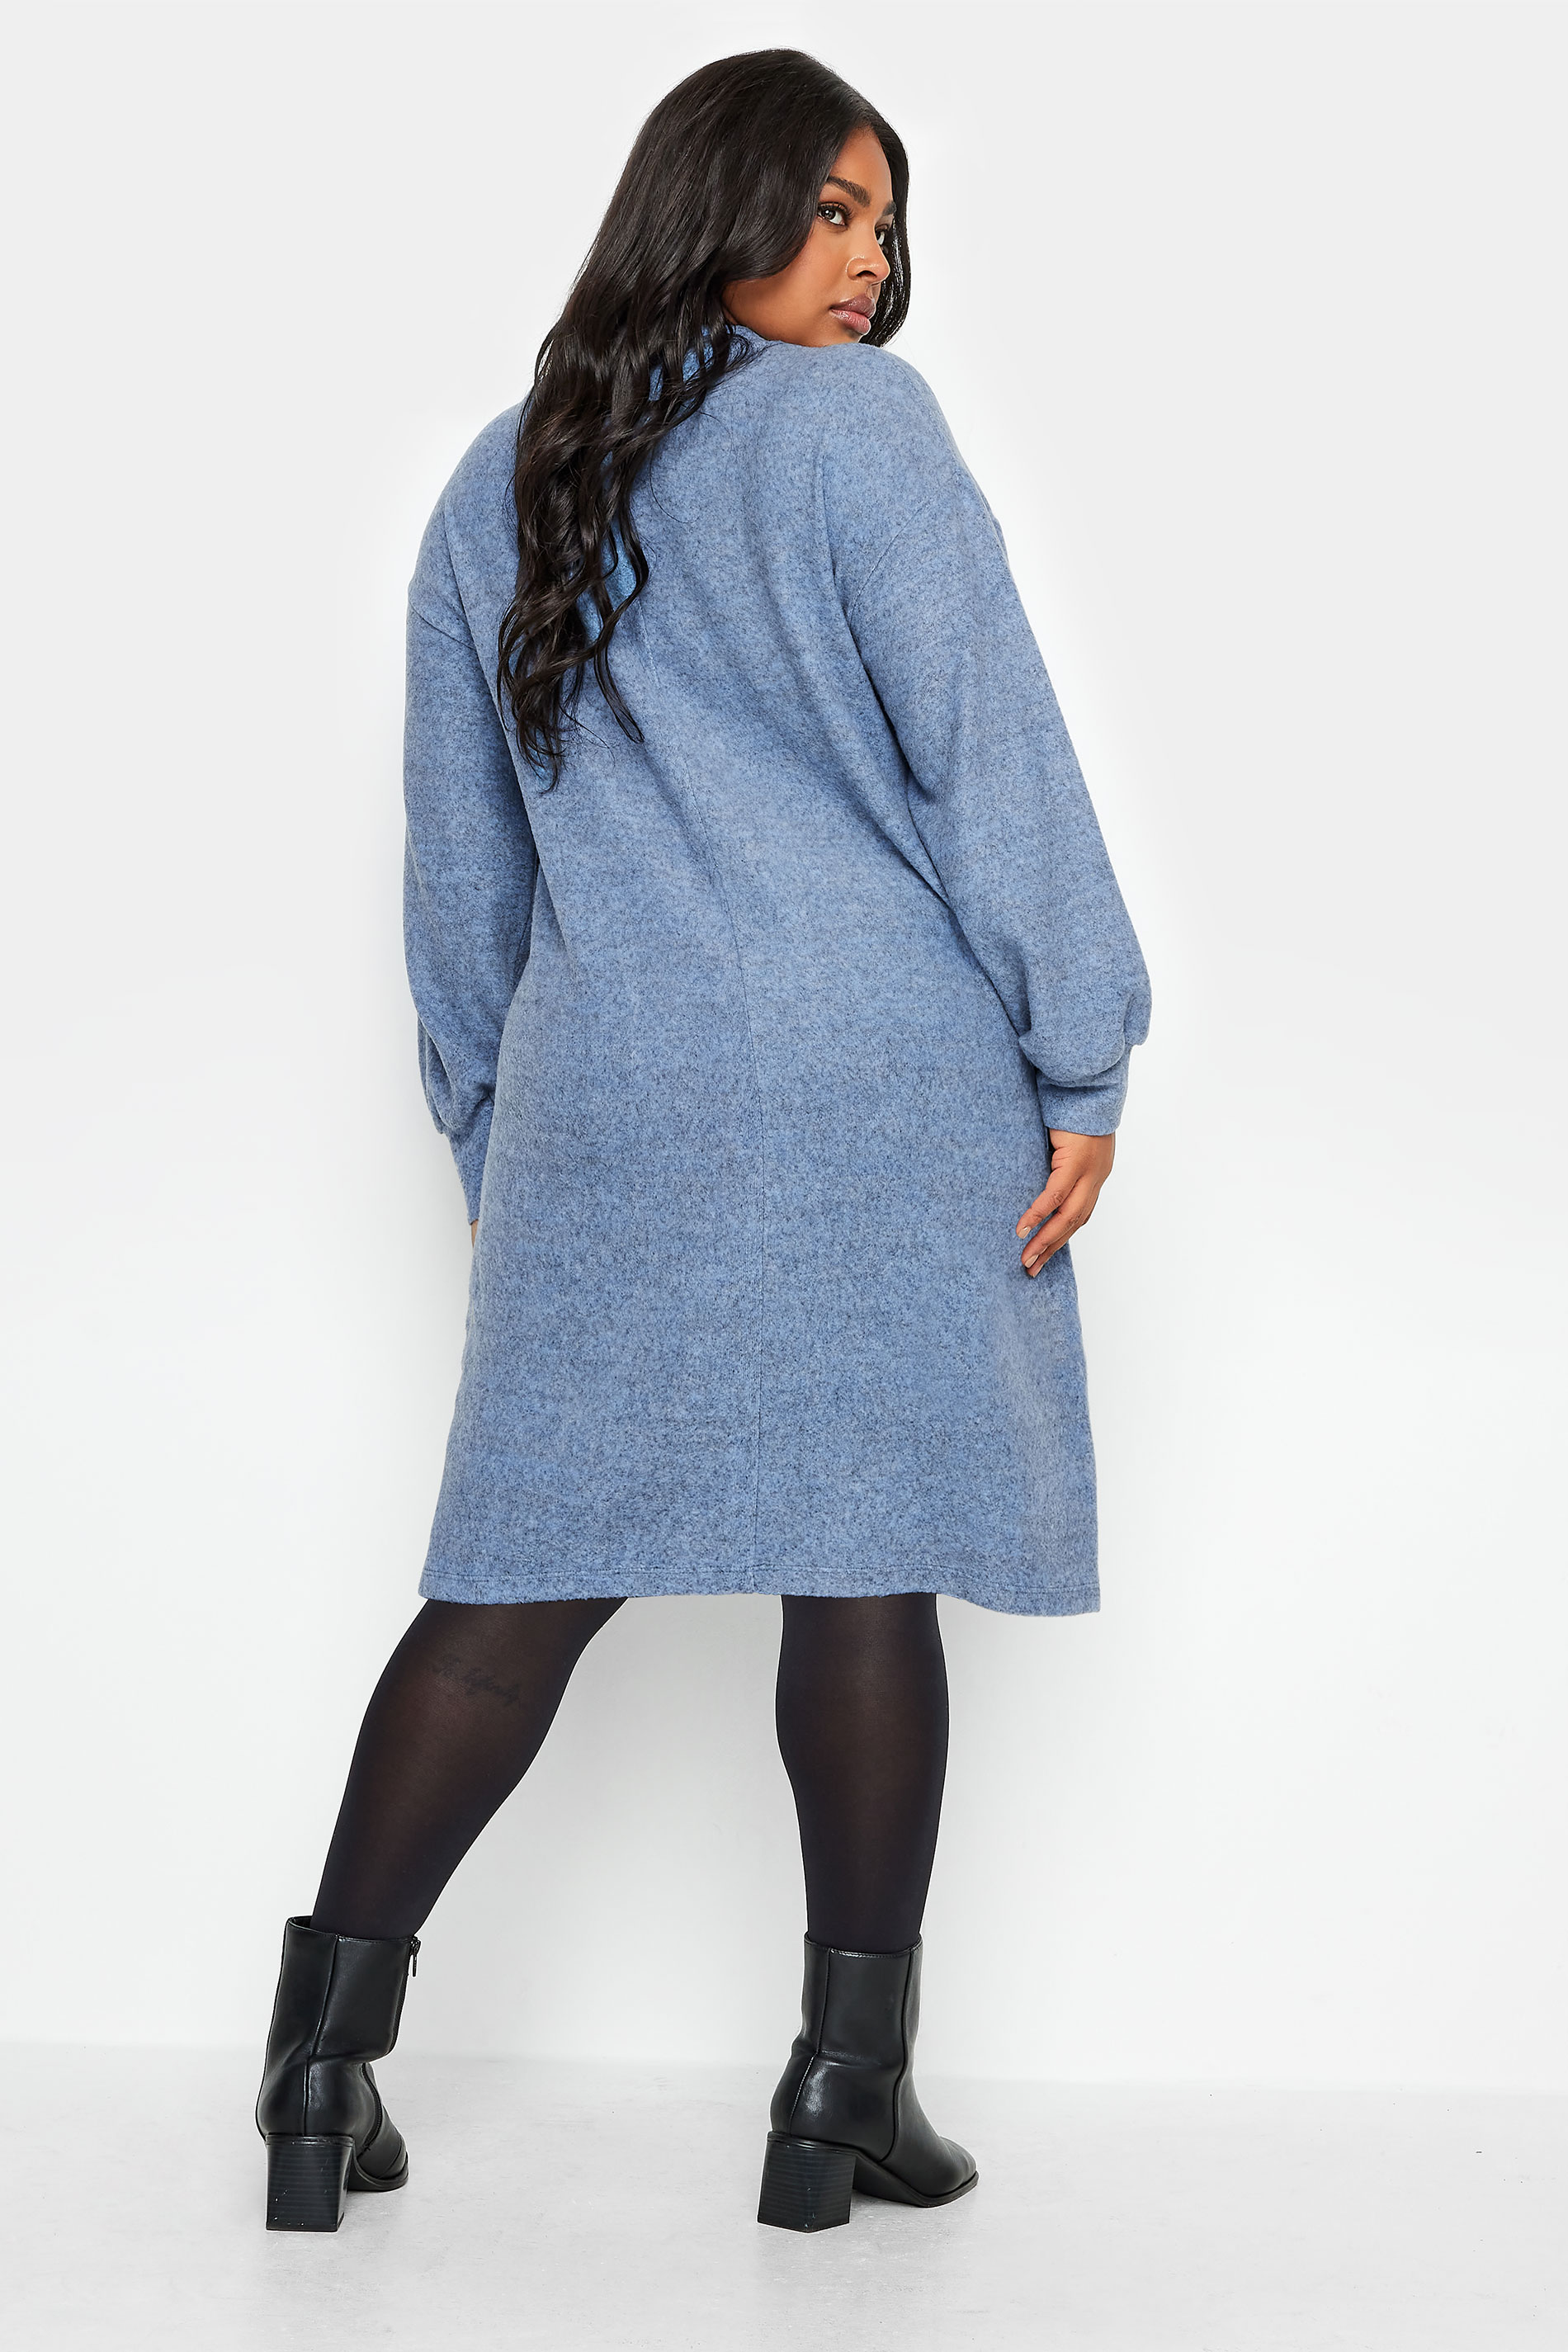 YOURS Plus Size Blue Soft Touch Knitted Jumper Dress | Yours Clothing 3